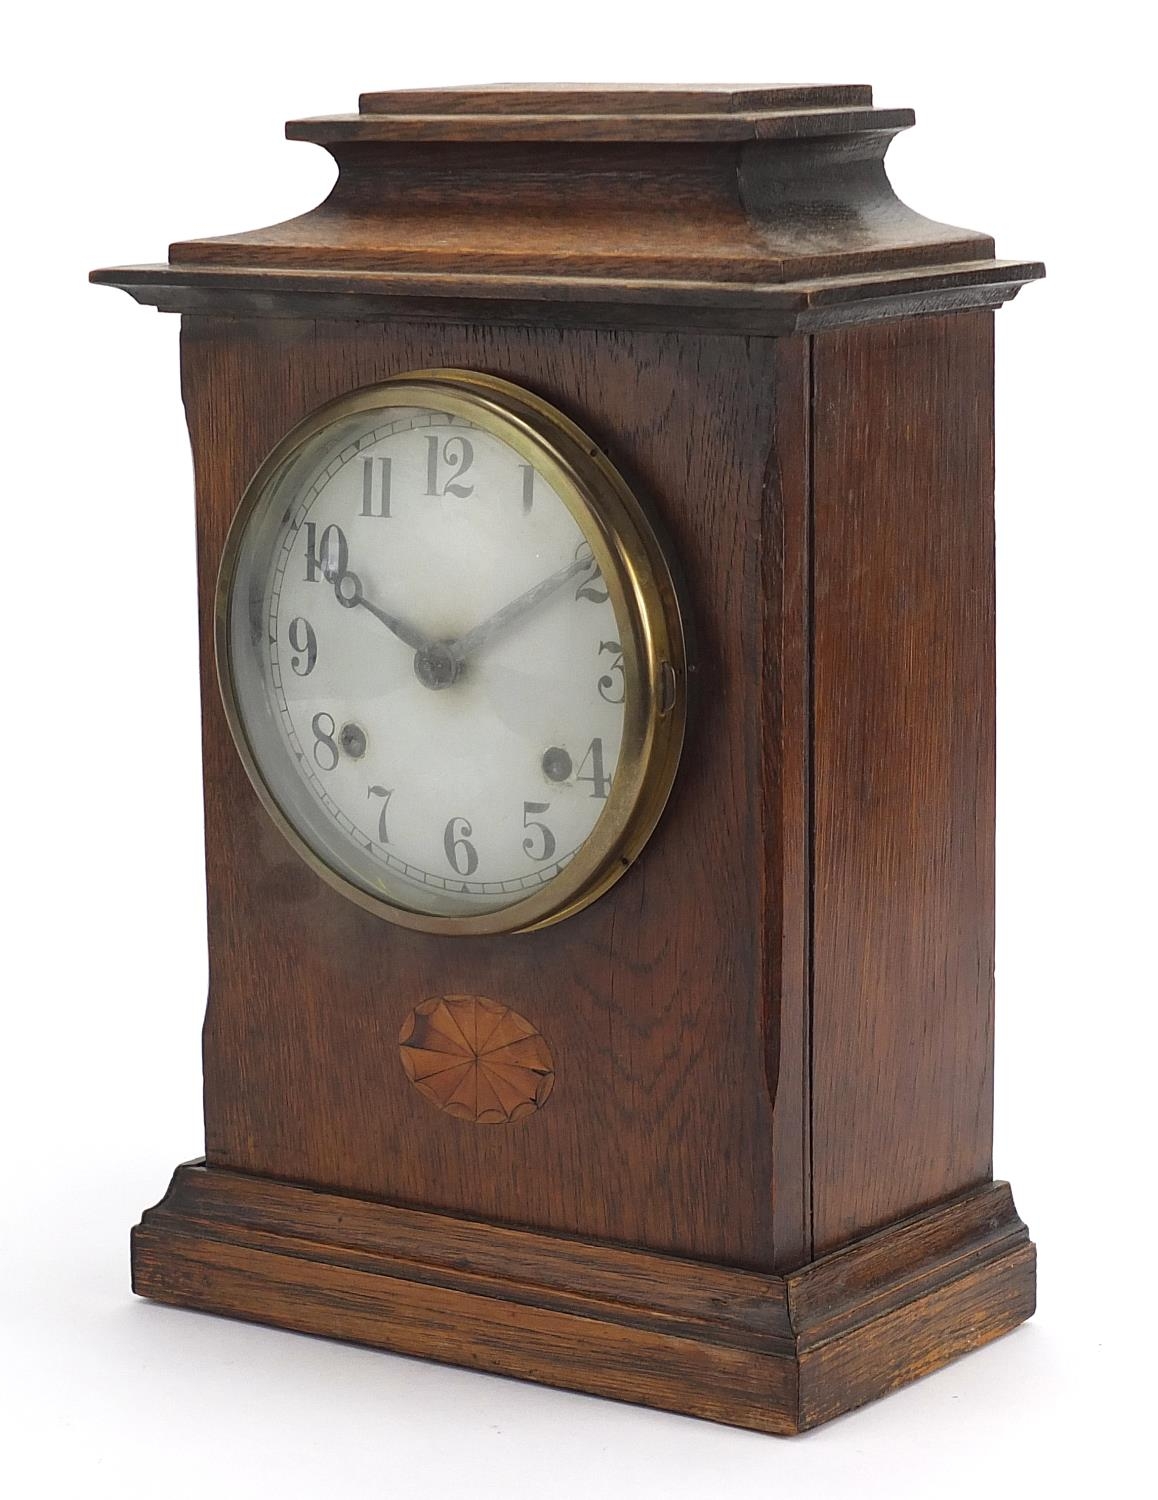 Edwardian inlaid oak mantle clock with painted dial having Arabic numerals, 34cm high